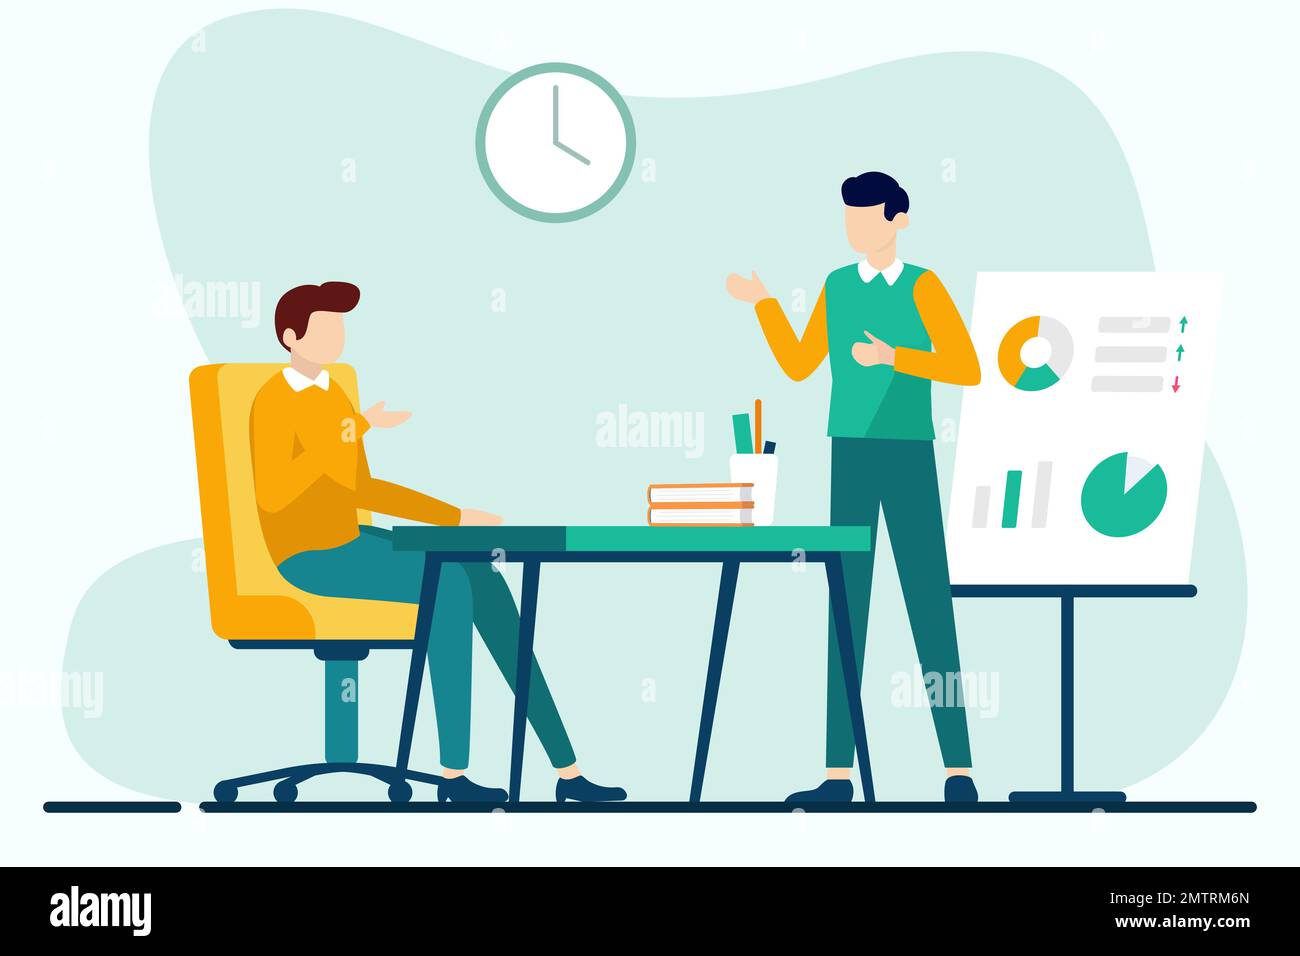 Business meeting. Vector illustration in flat design style. Man and woman sitting at the table, discussing business strategy. Stock Vector